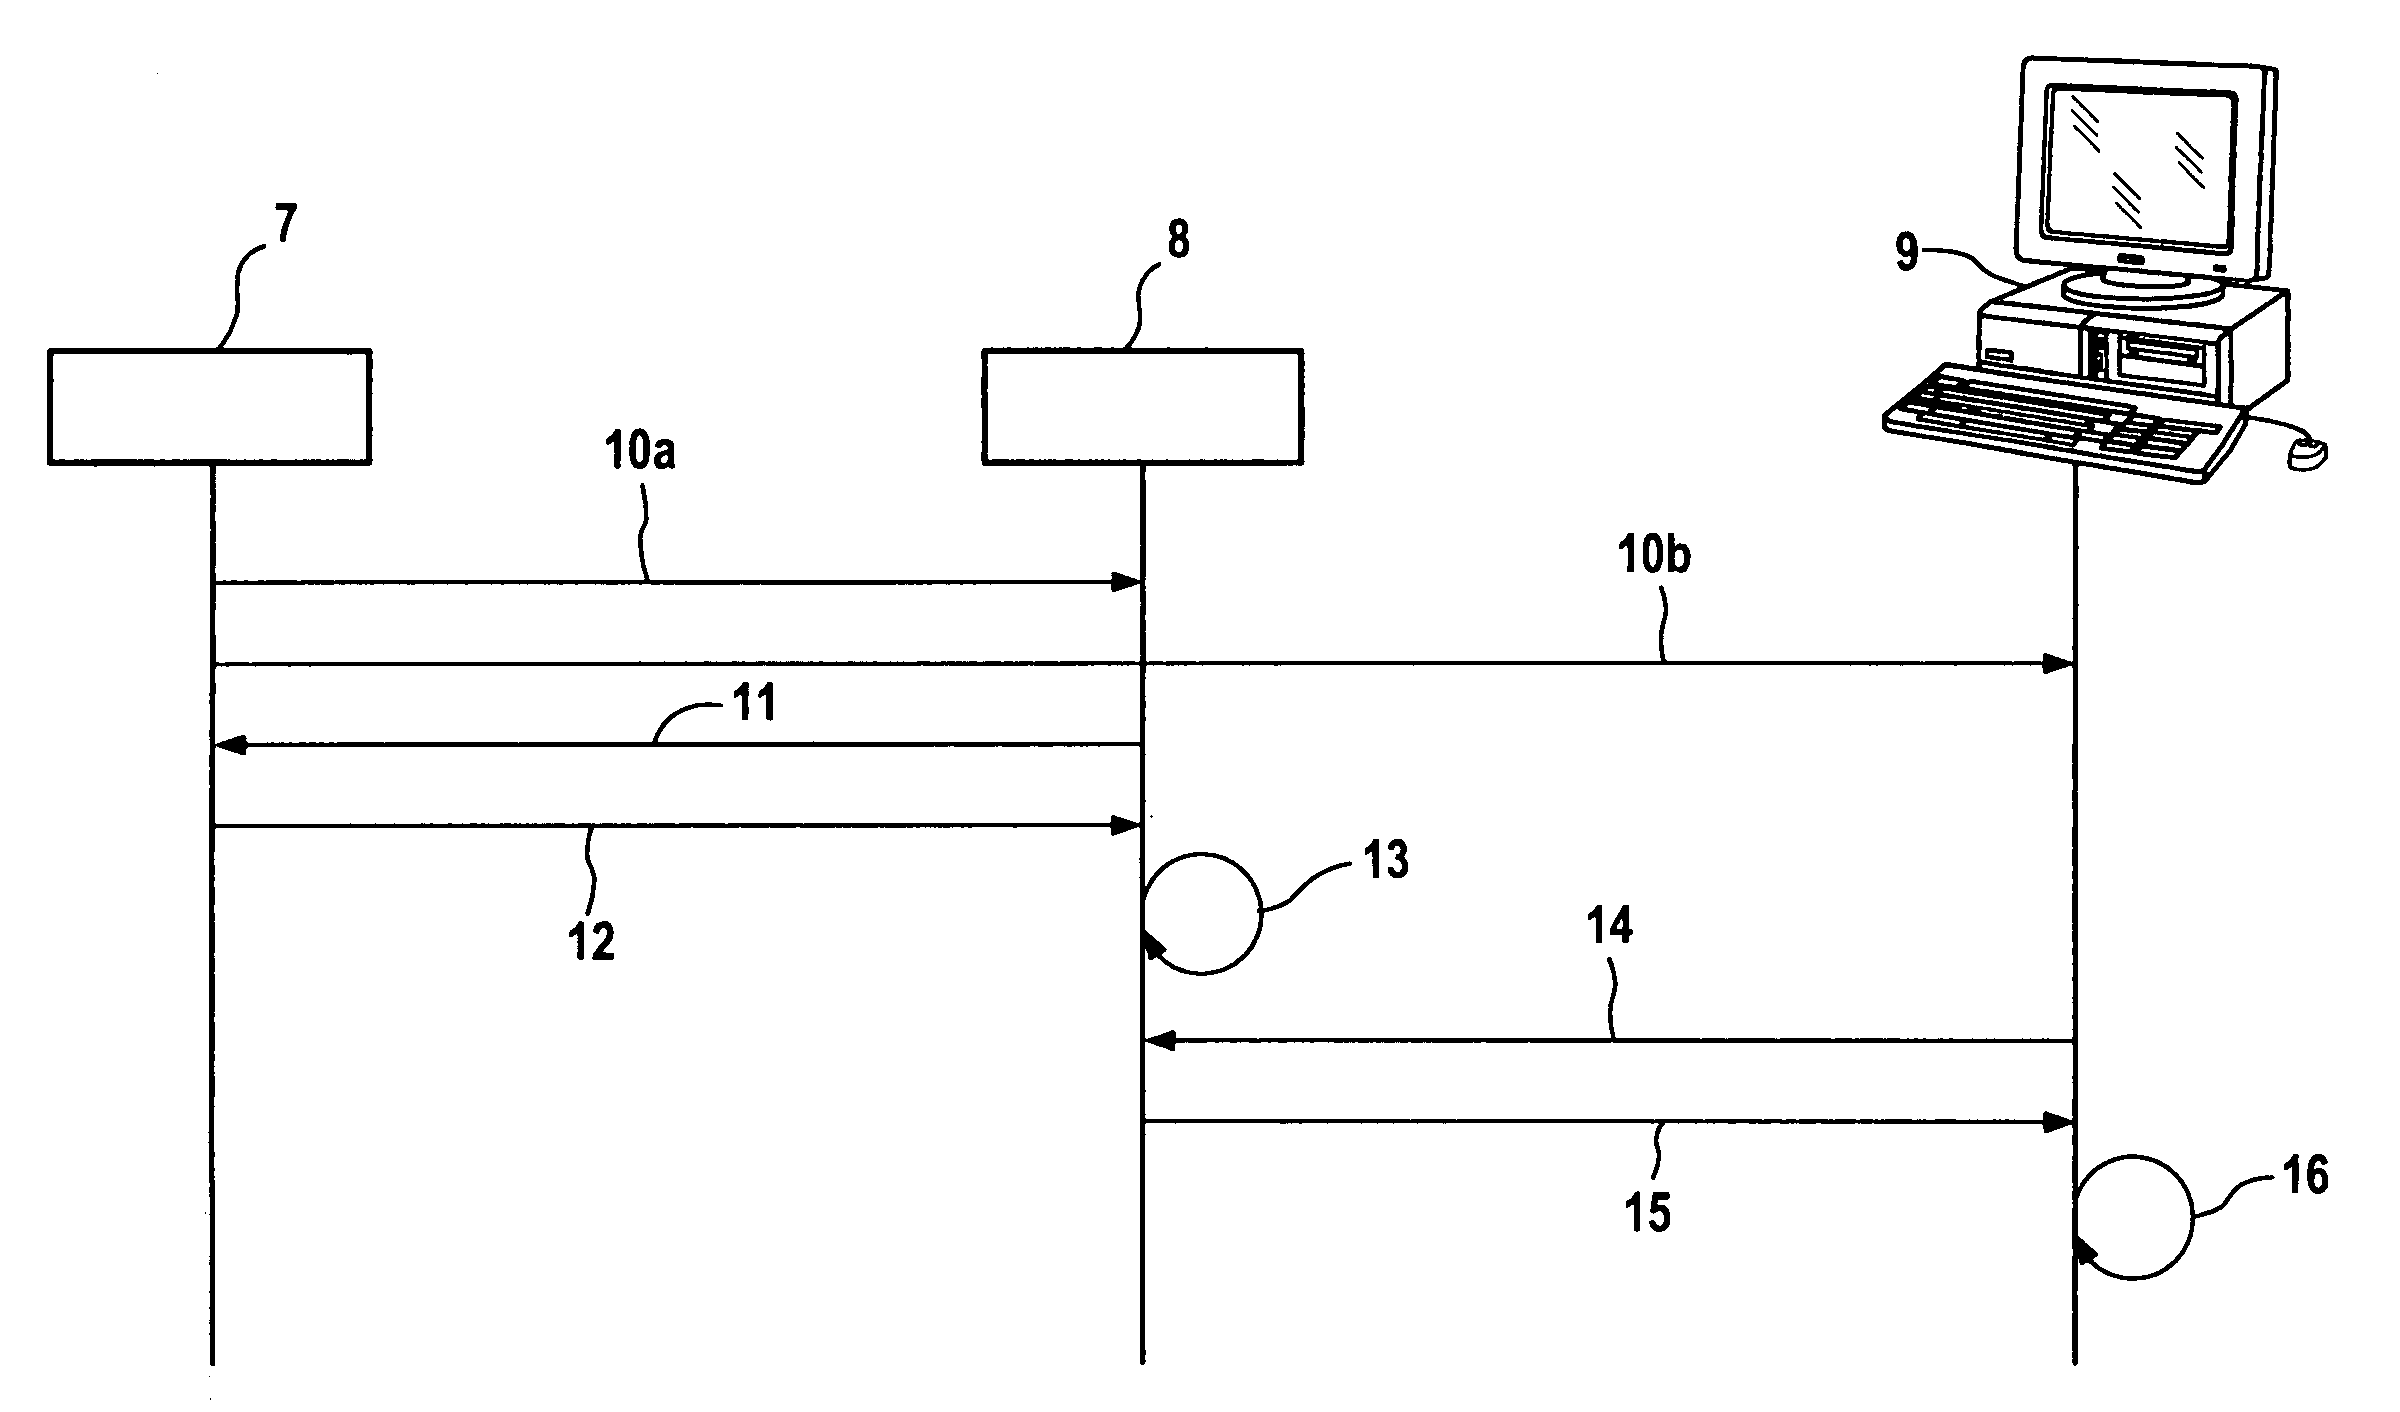 System and method for analyzing a network and/or generating the topology of a network